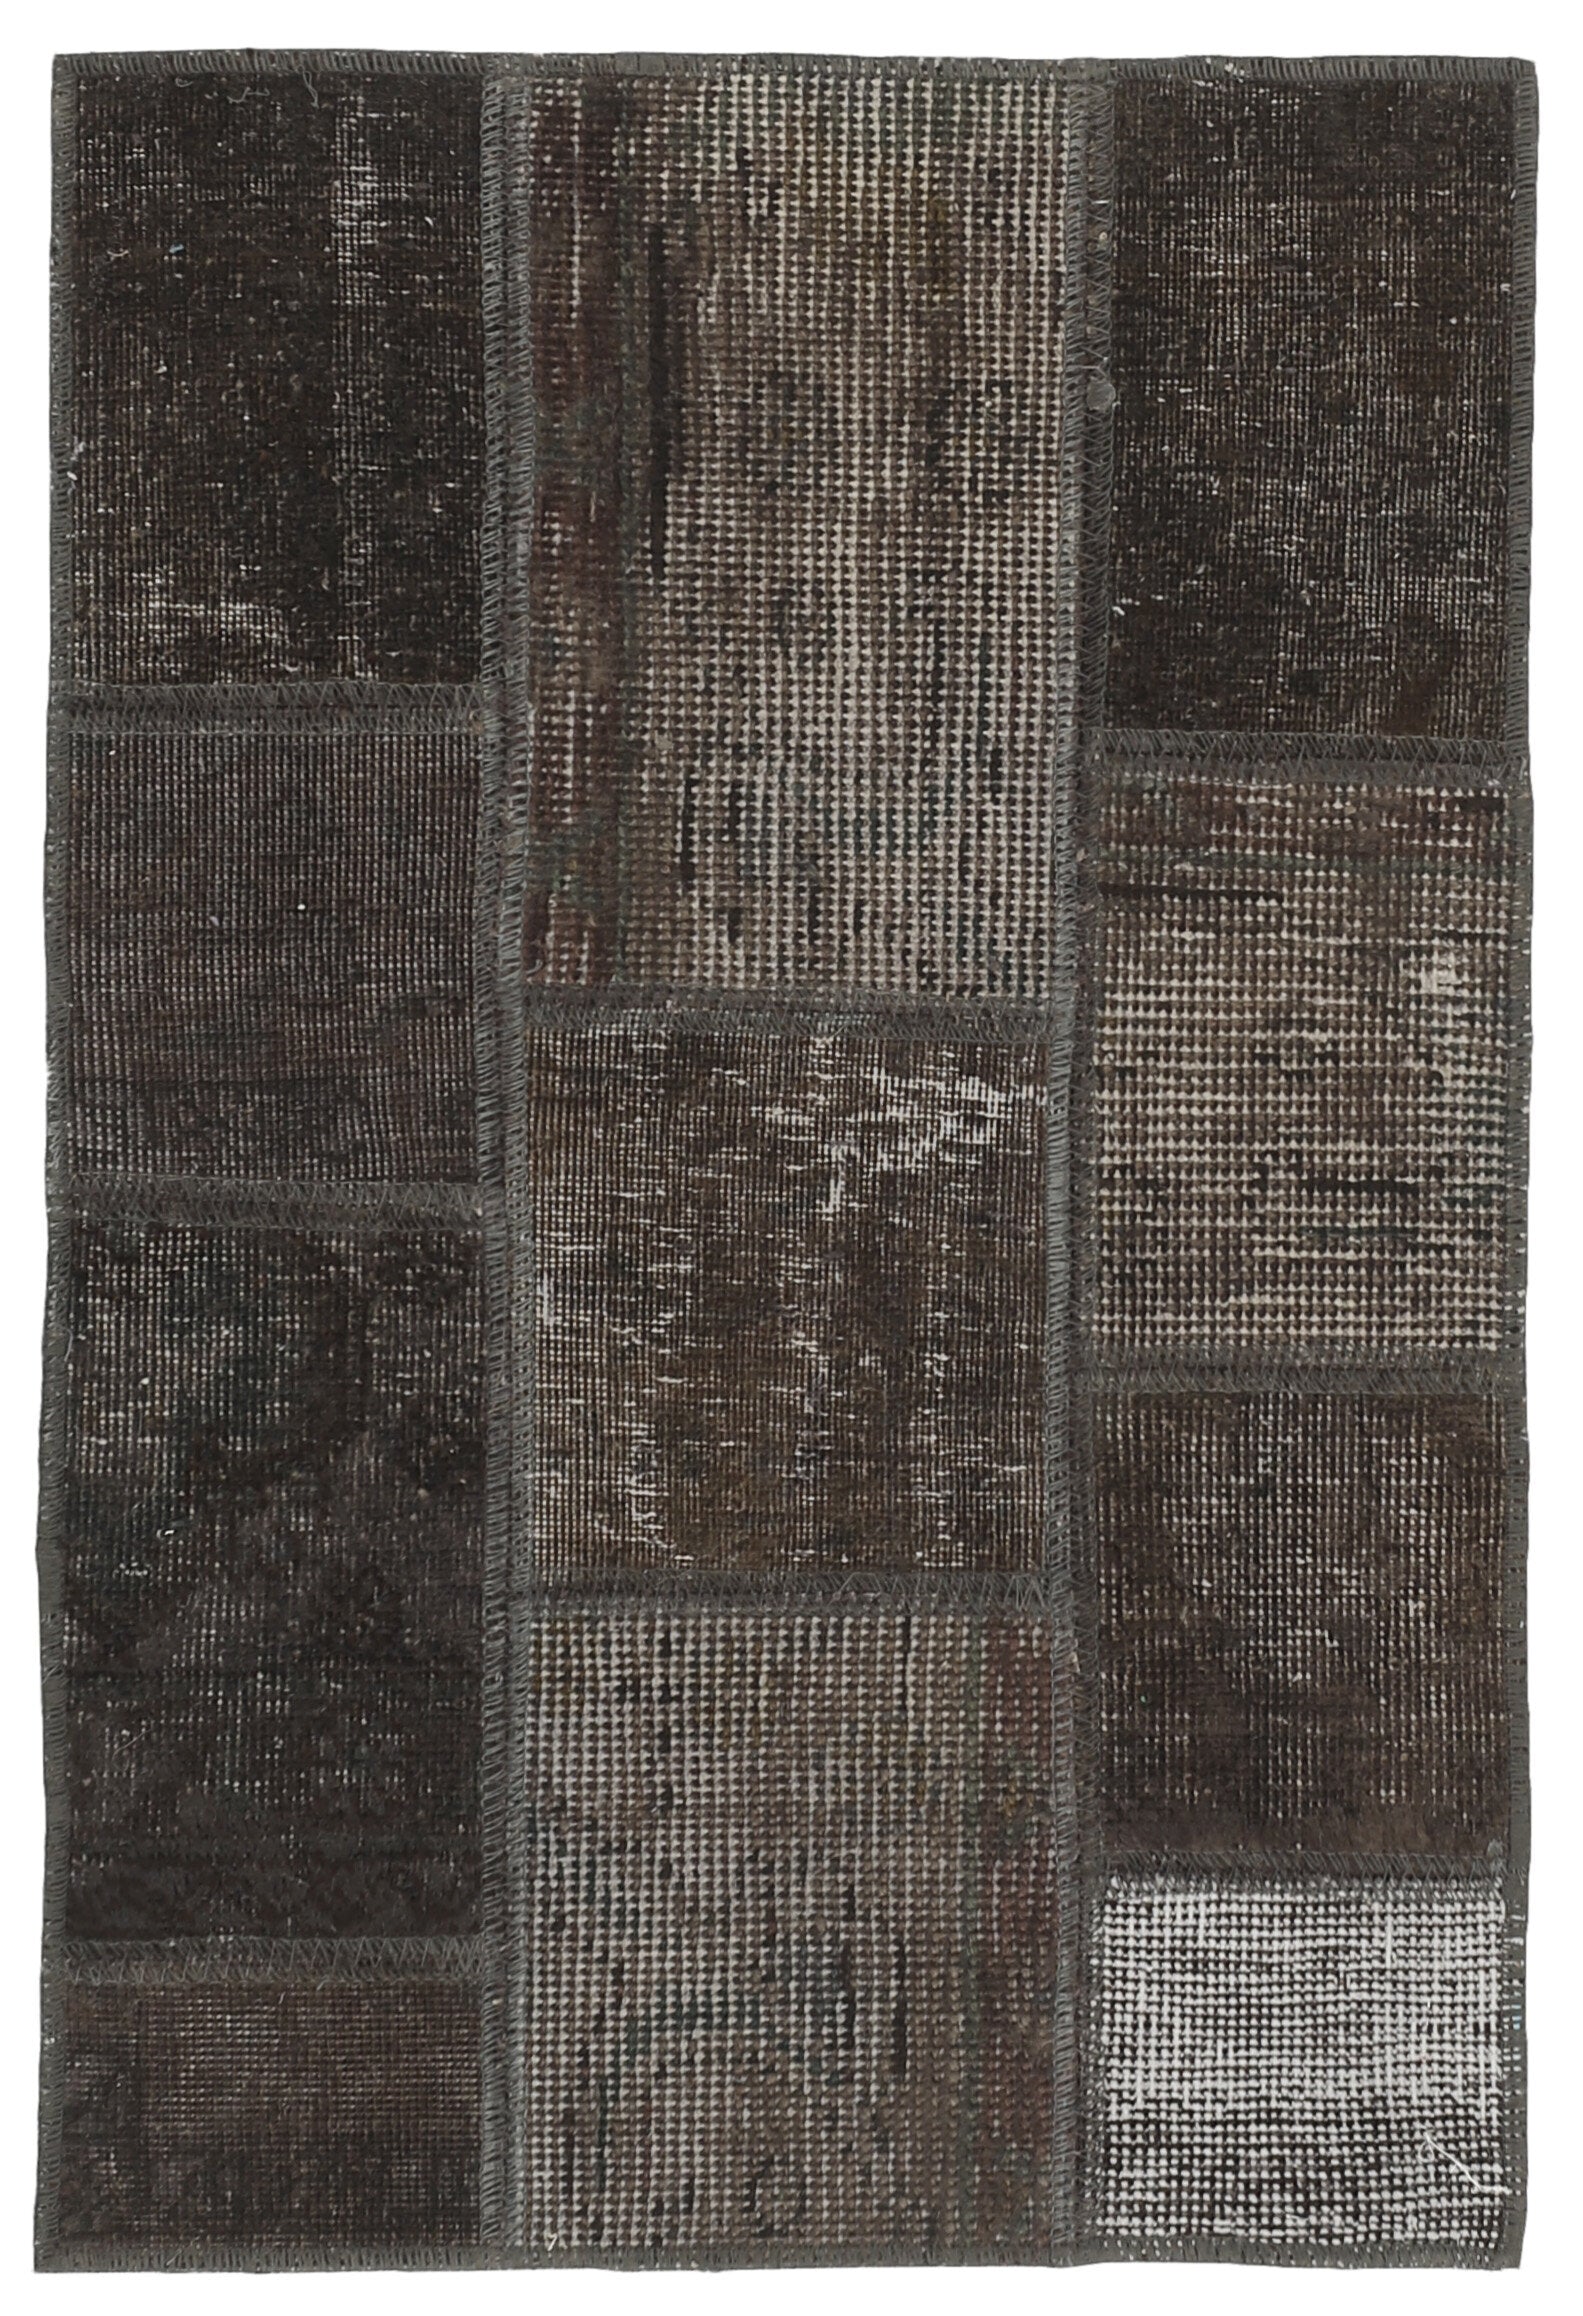 Authentic grey patchwork persian rug